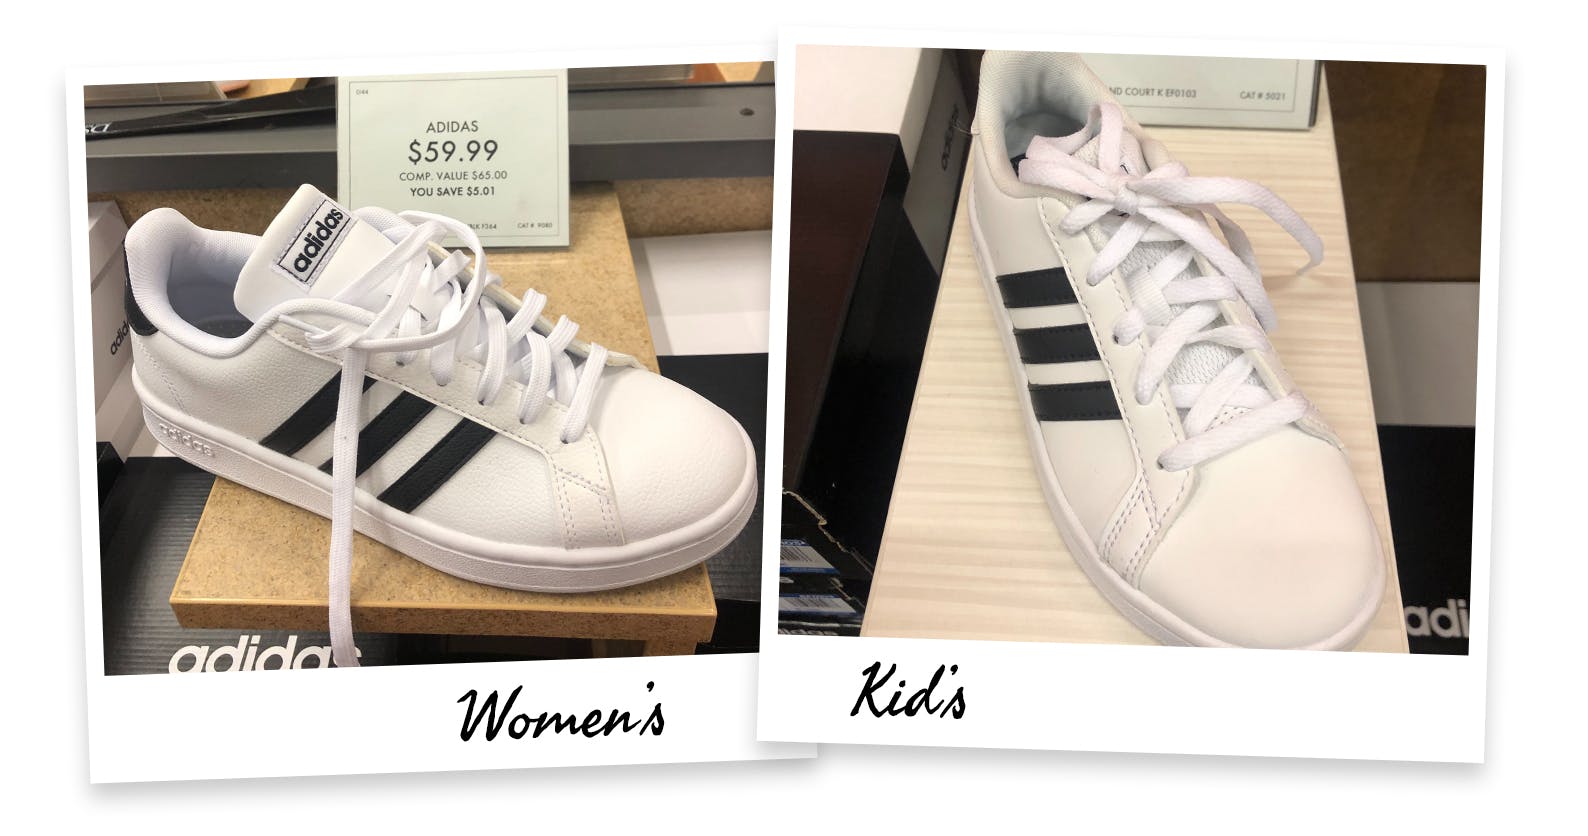 Save Big On Women S Shoes By Buying The Identical Kids Shoe Size The Krazy Coupon Lady